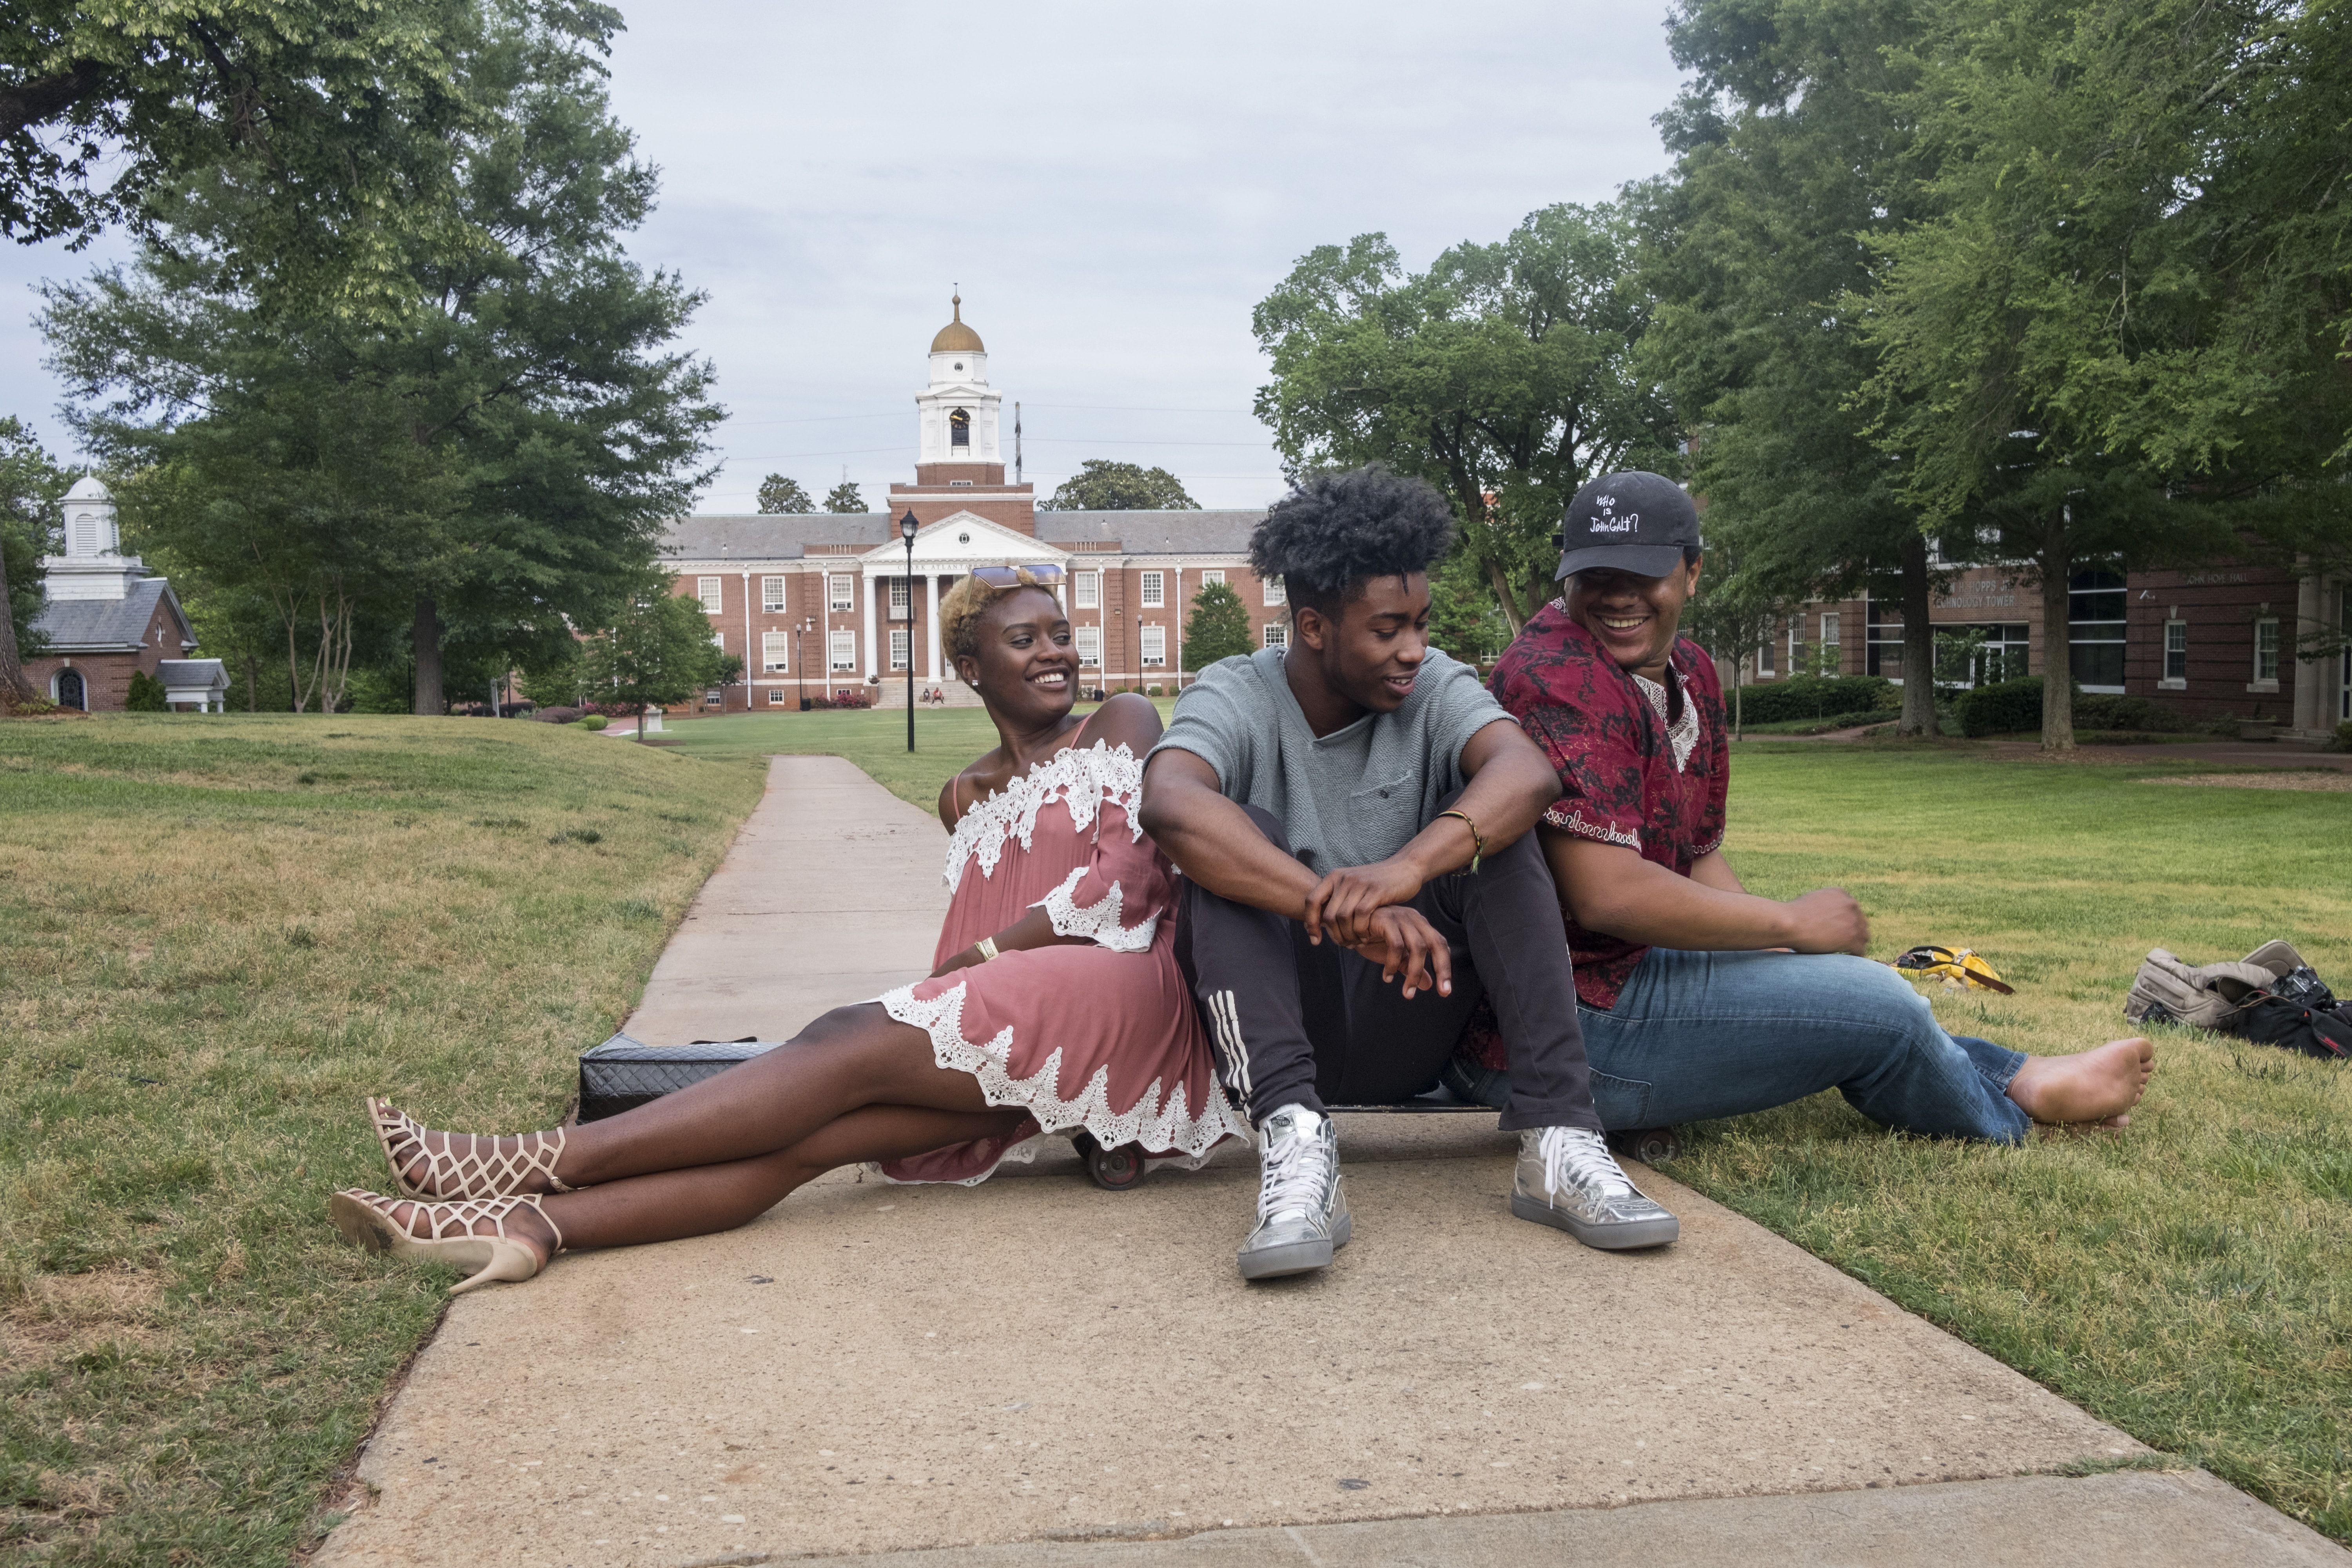 The Atlanta University Center’s campuses adjoin. Spelman student DeJah Ault, with Gerard Contee from Morehouse and Khalil Pickering from Clark Atlanta, says, “It doesn’t feel like we go to separate schools.” Image by Radcliffe "Ruddy" Roye. United States, 2017.
